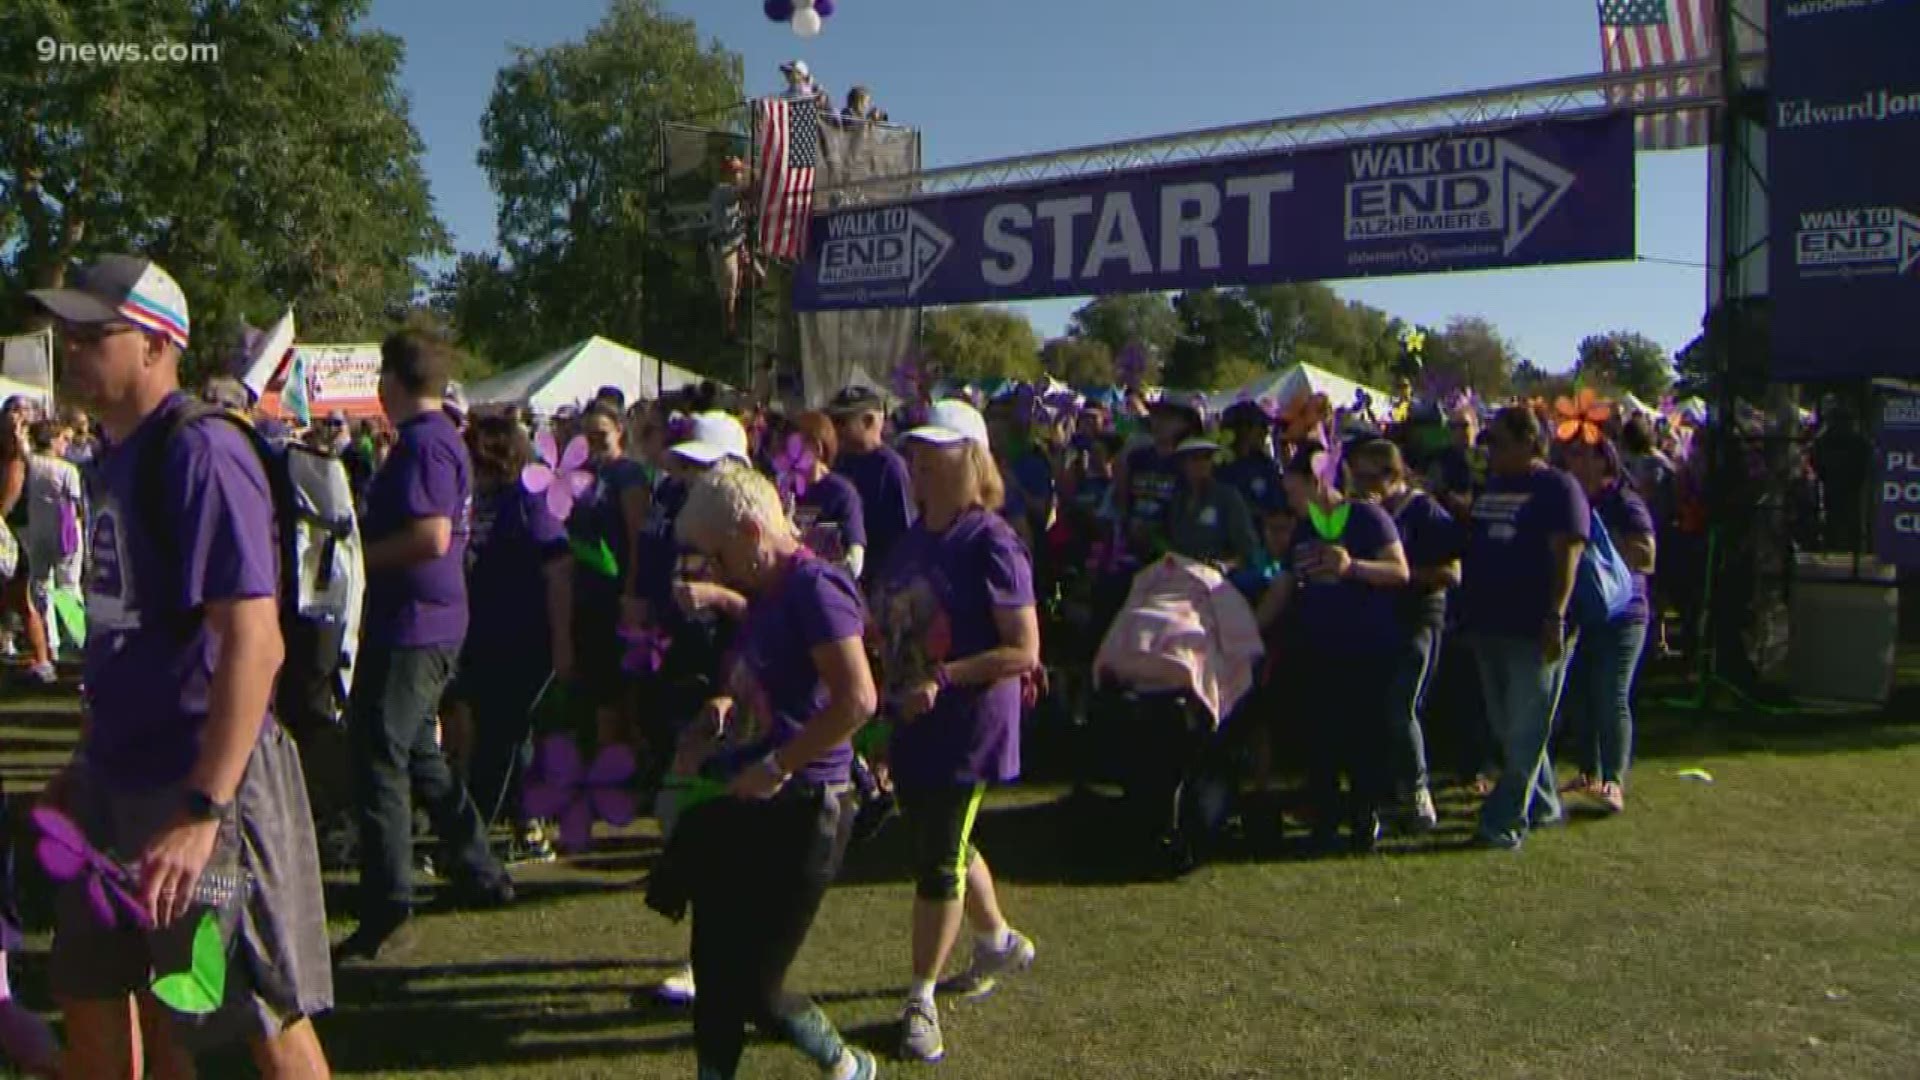 Thousands of people in the metro area contributed to finding a cure this weekend - helping the Alzheimer's Association raise atleast $998,000.